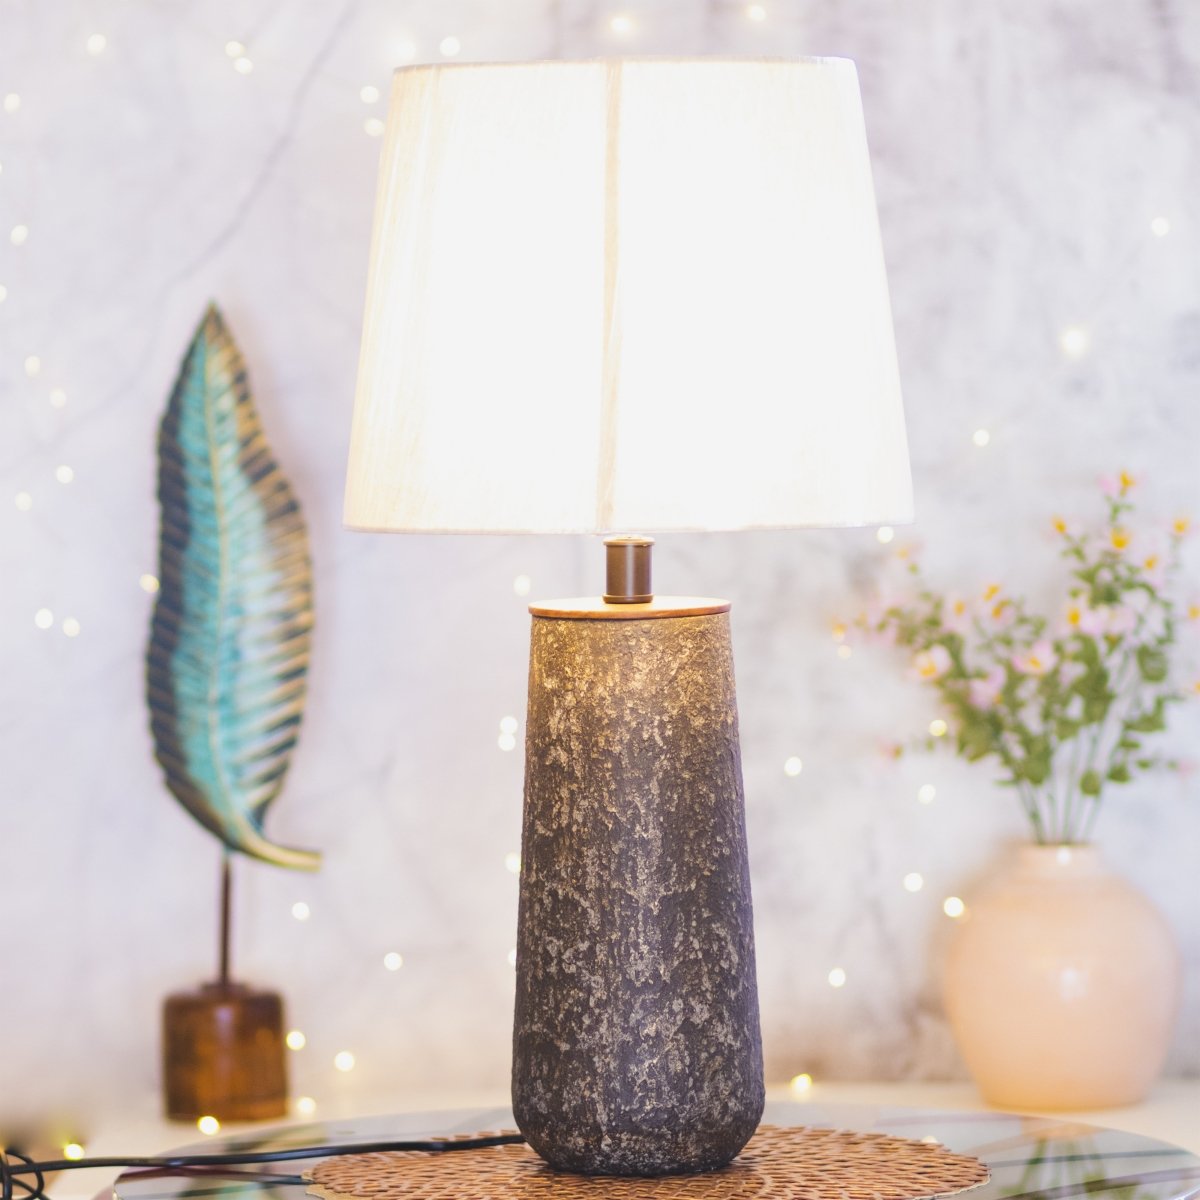 Kezevel Metal Decor Table Lamp - Antique Bronze Finish Textured Side Lamp with Fabric Shade, Table Lamps for Home Decoration